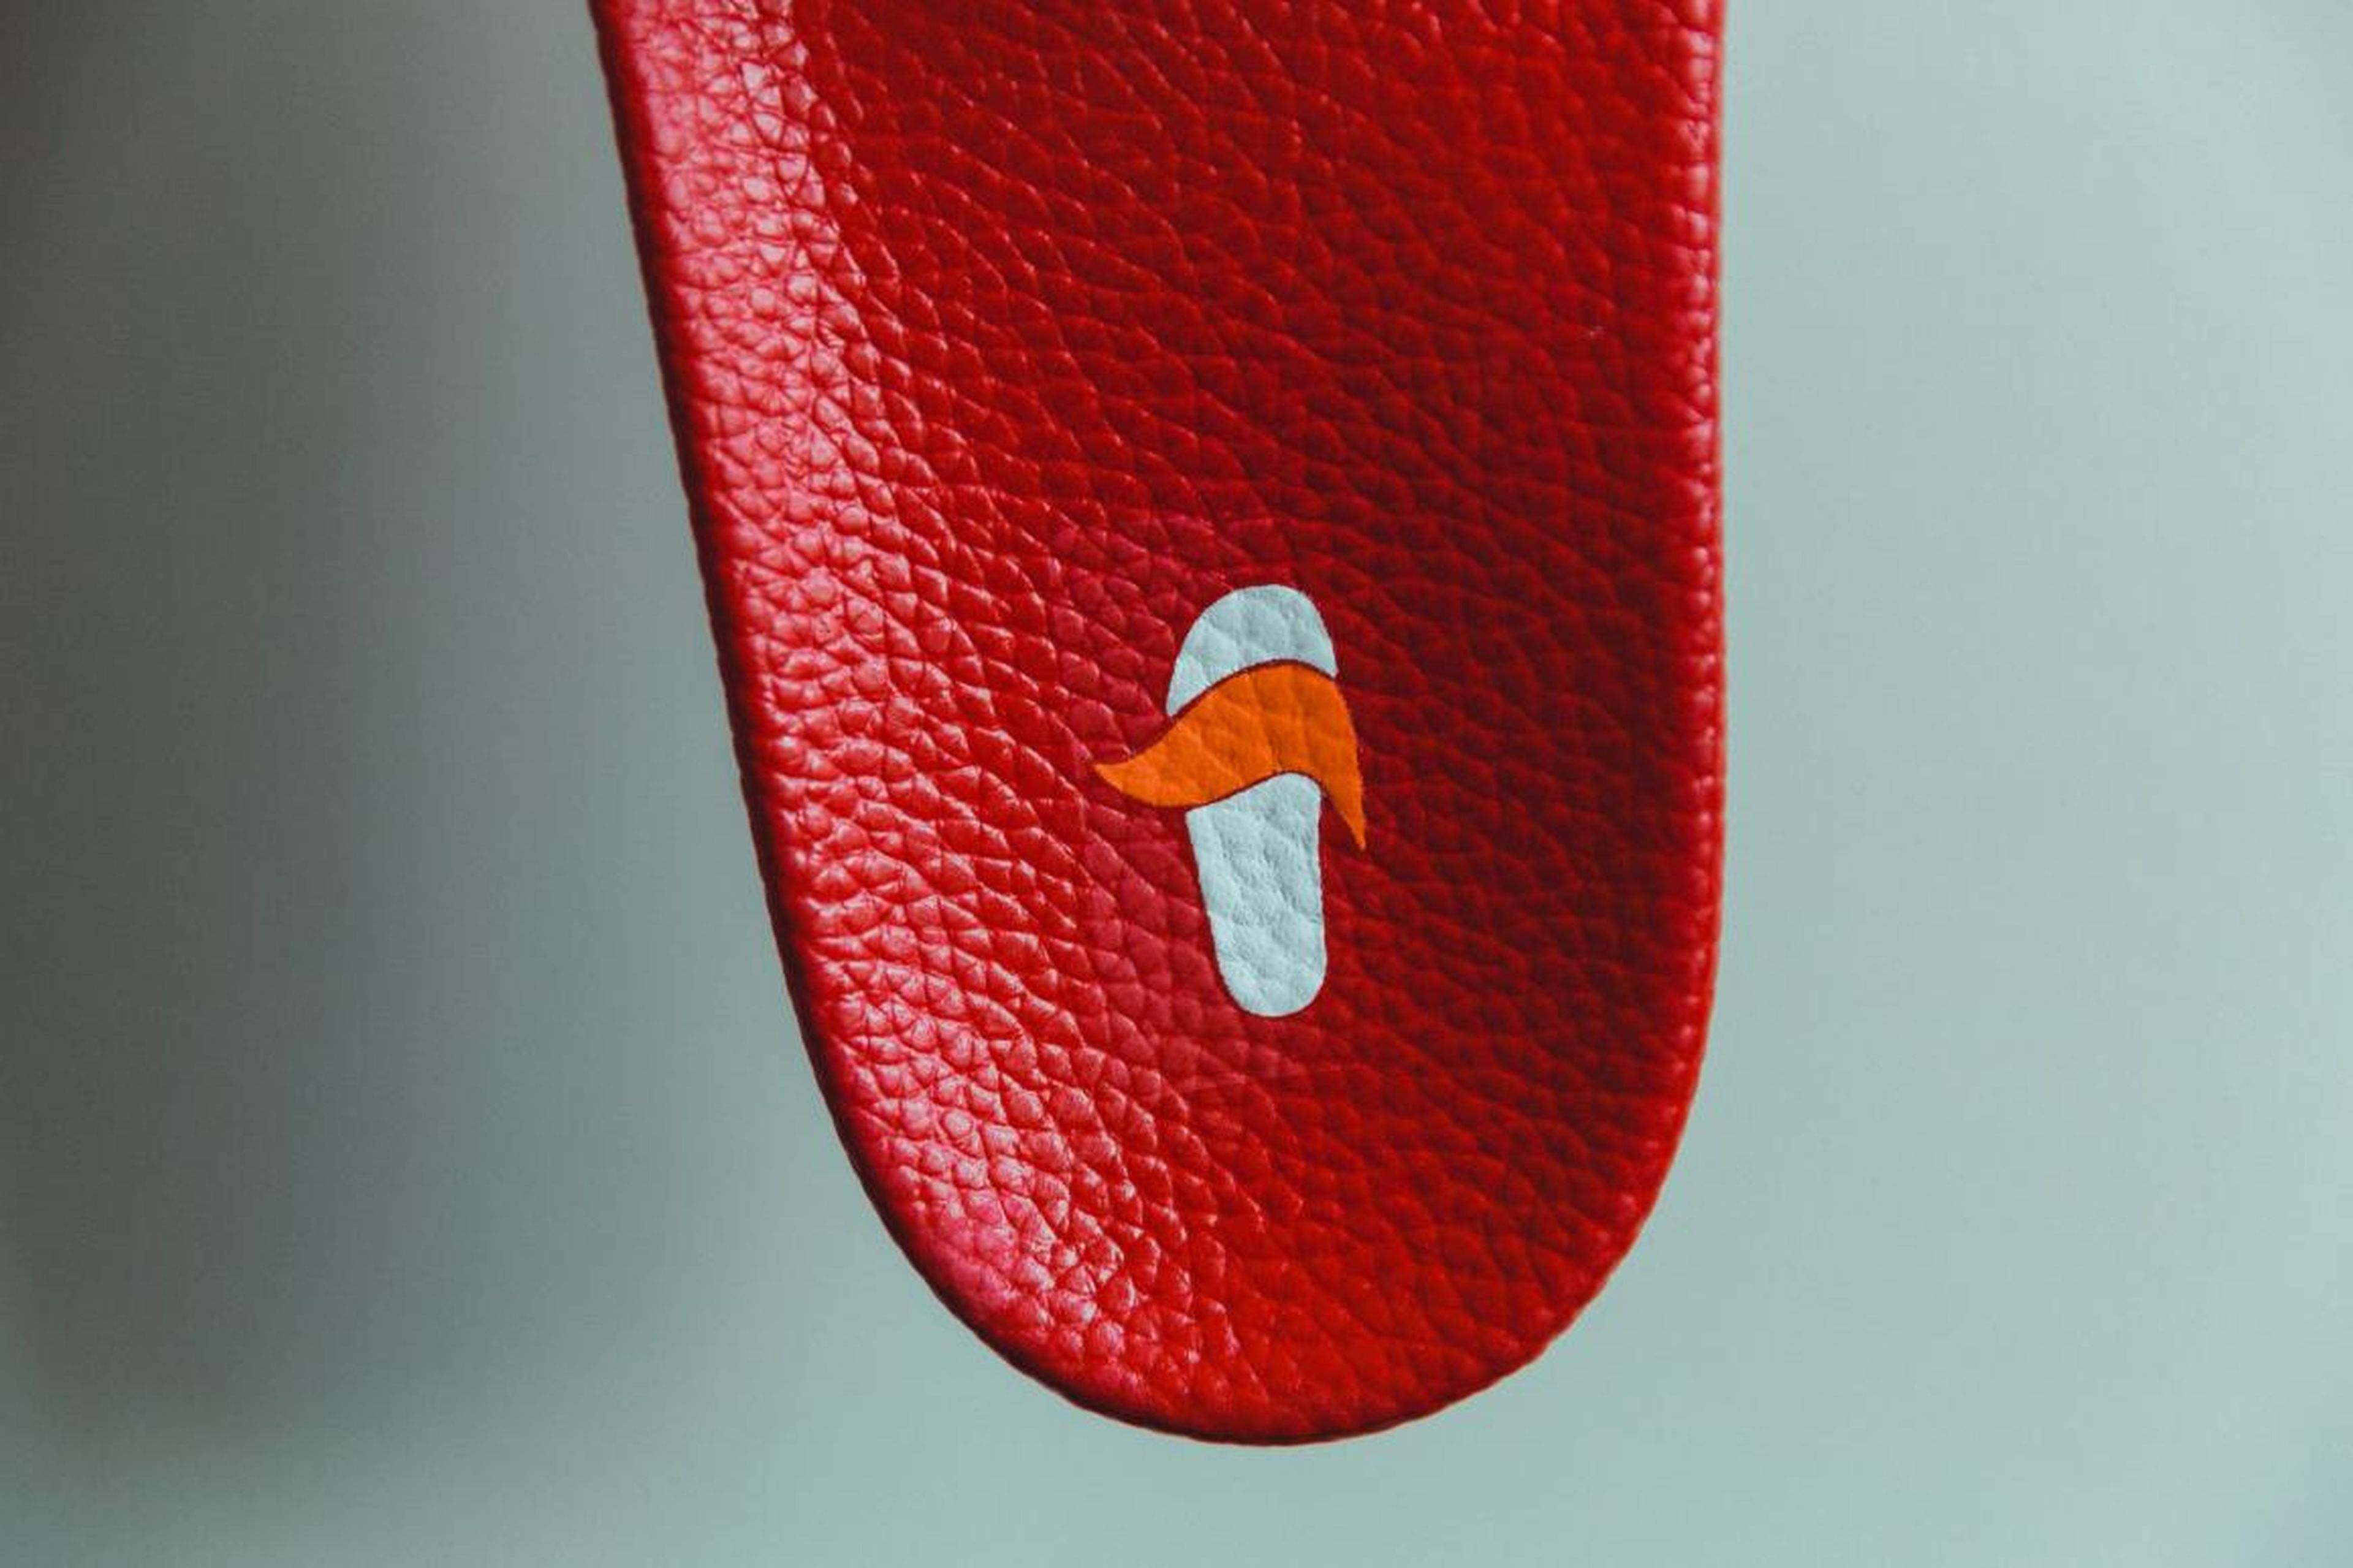 Despite making only three flip-flop designs, in five sizes, with a price point of about $30, Morrison sold every single Trump flip-flop he made in less than a month. He says they are "permanently sold out."